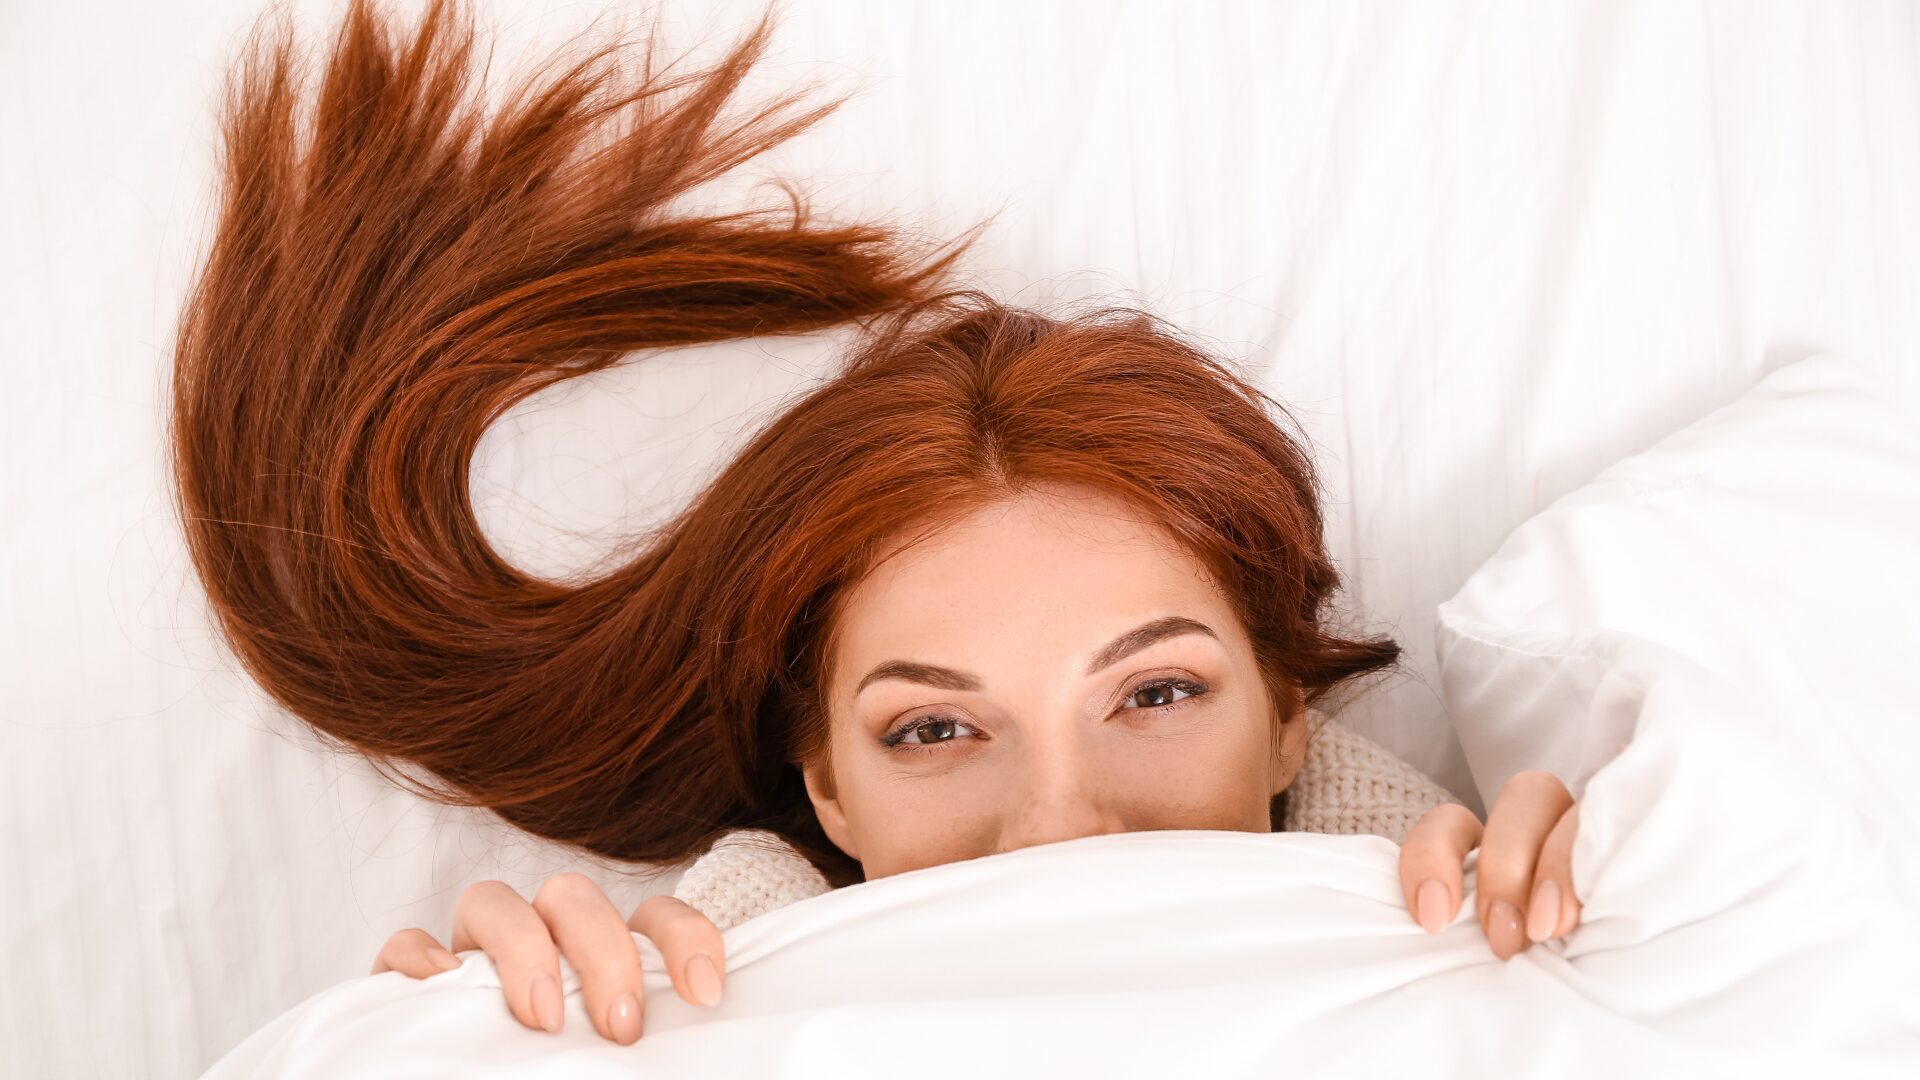 3 Dangers of Sleeping with Wet Red Hair